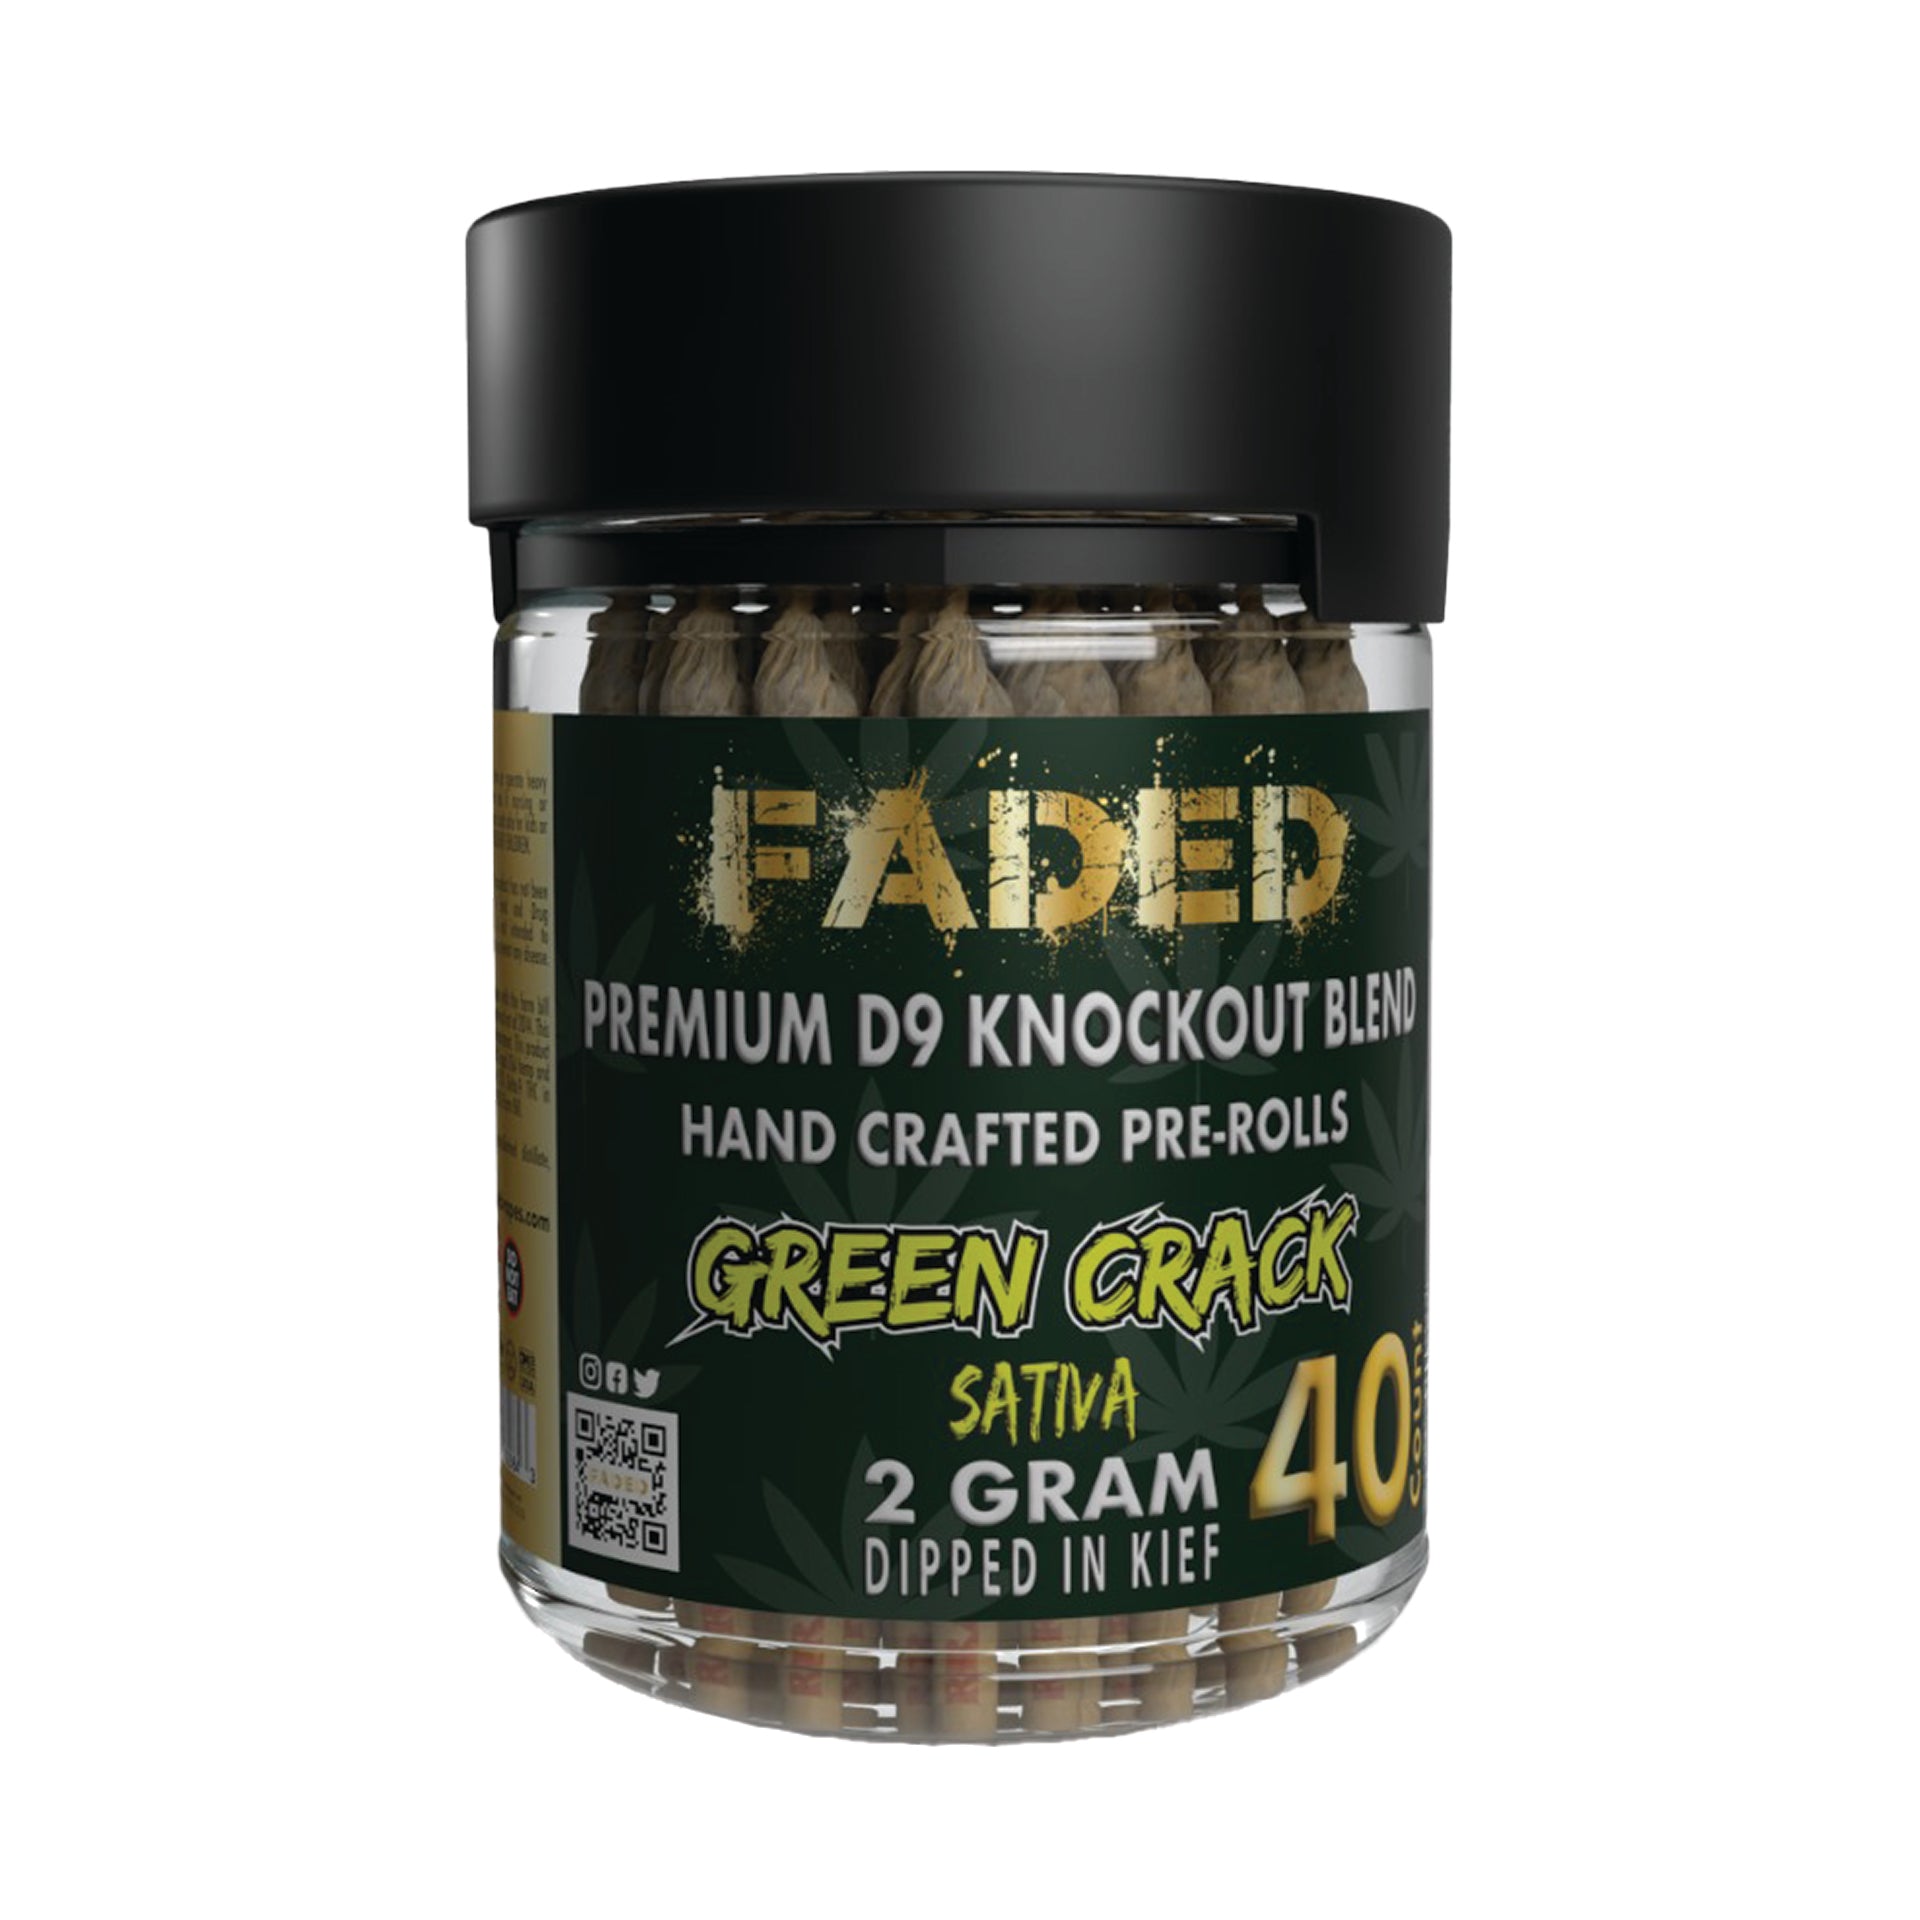 FADED PREMIUM DELTA-9 KNOCKOUT BLEND GREEN CRACK HAND CRAFTED PRE-ROLL 2GR 40CT JAR